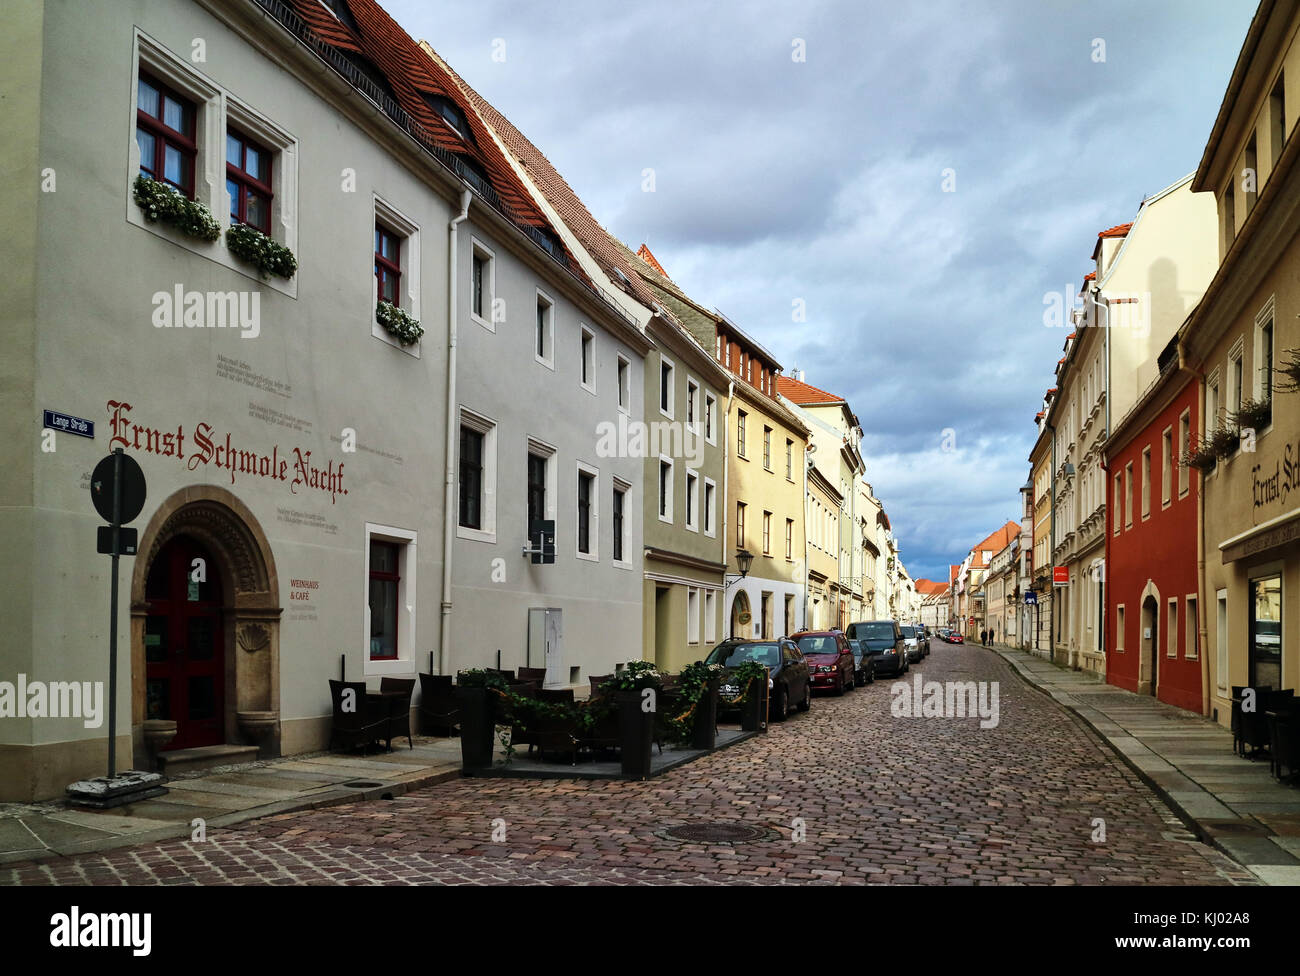 Europe, Germany, Saxony, Pirna city, the old town Stock Photo